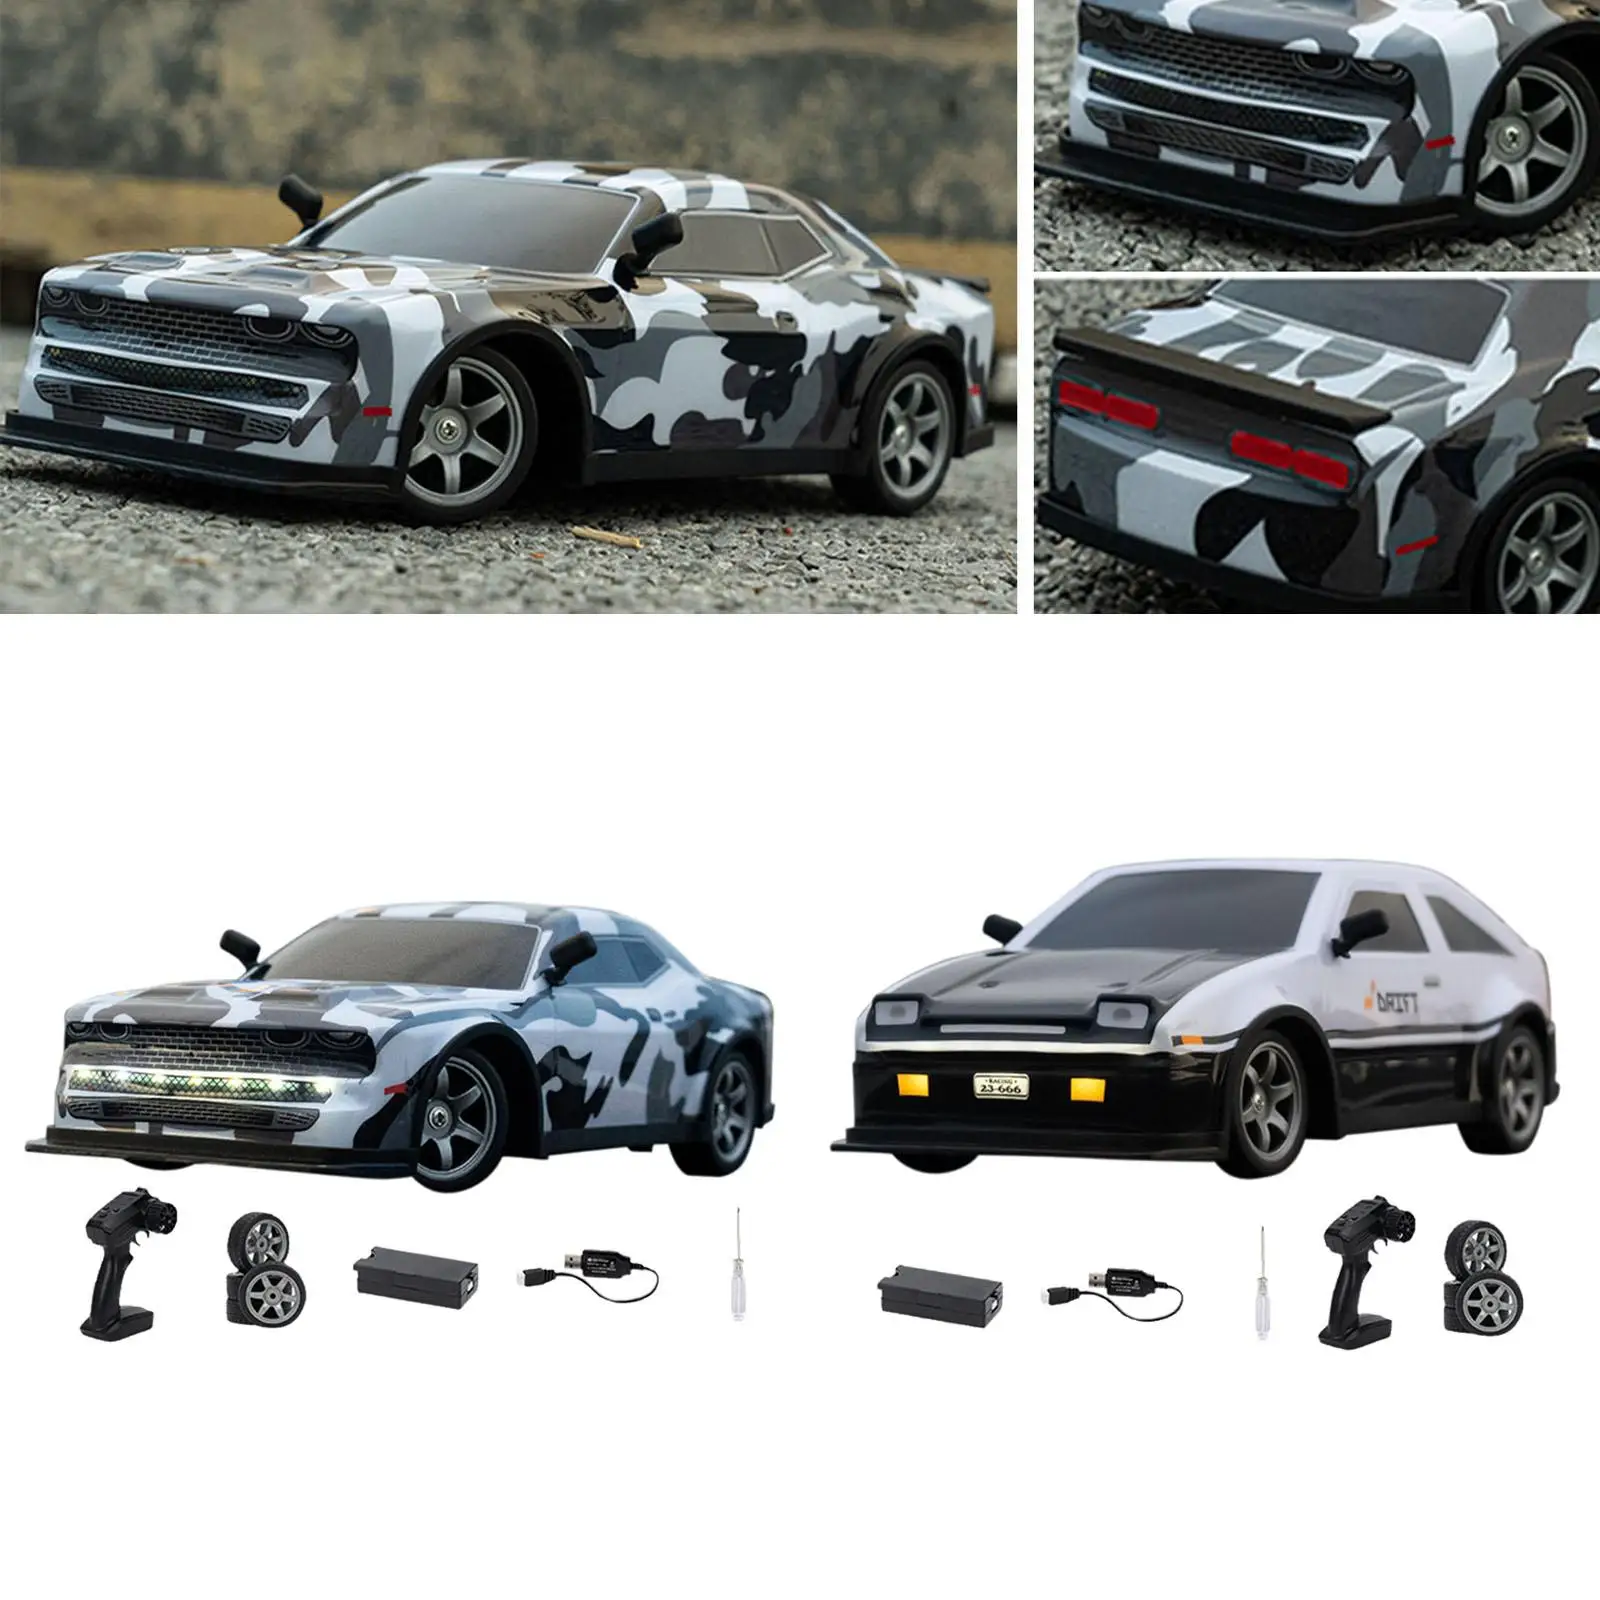 1:16 Scale RC Drift Car Drifting Tire Rechargeable 4WD Classic Vehicle Toy for Festivals Birthday Party Favors Holiday Present